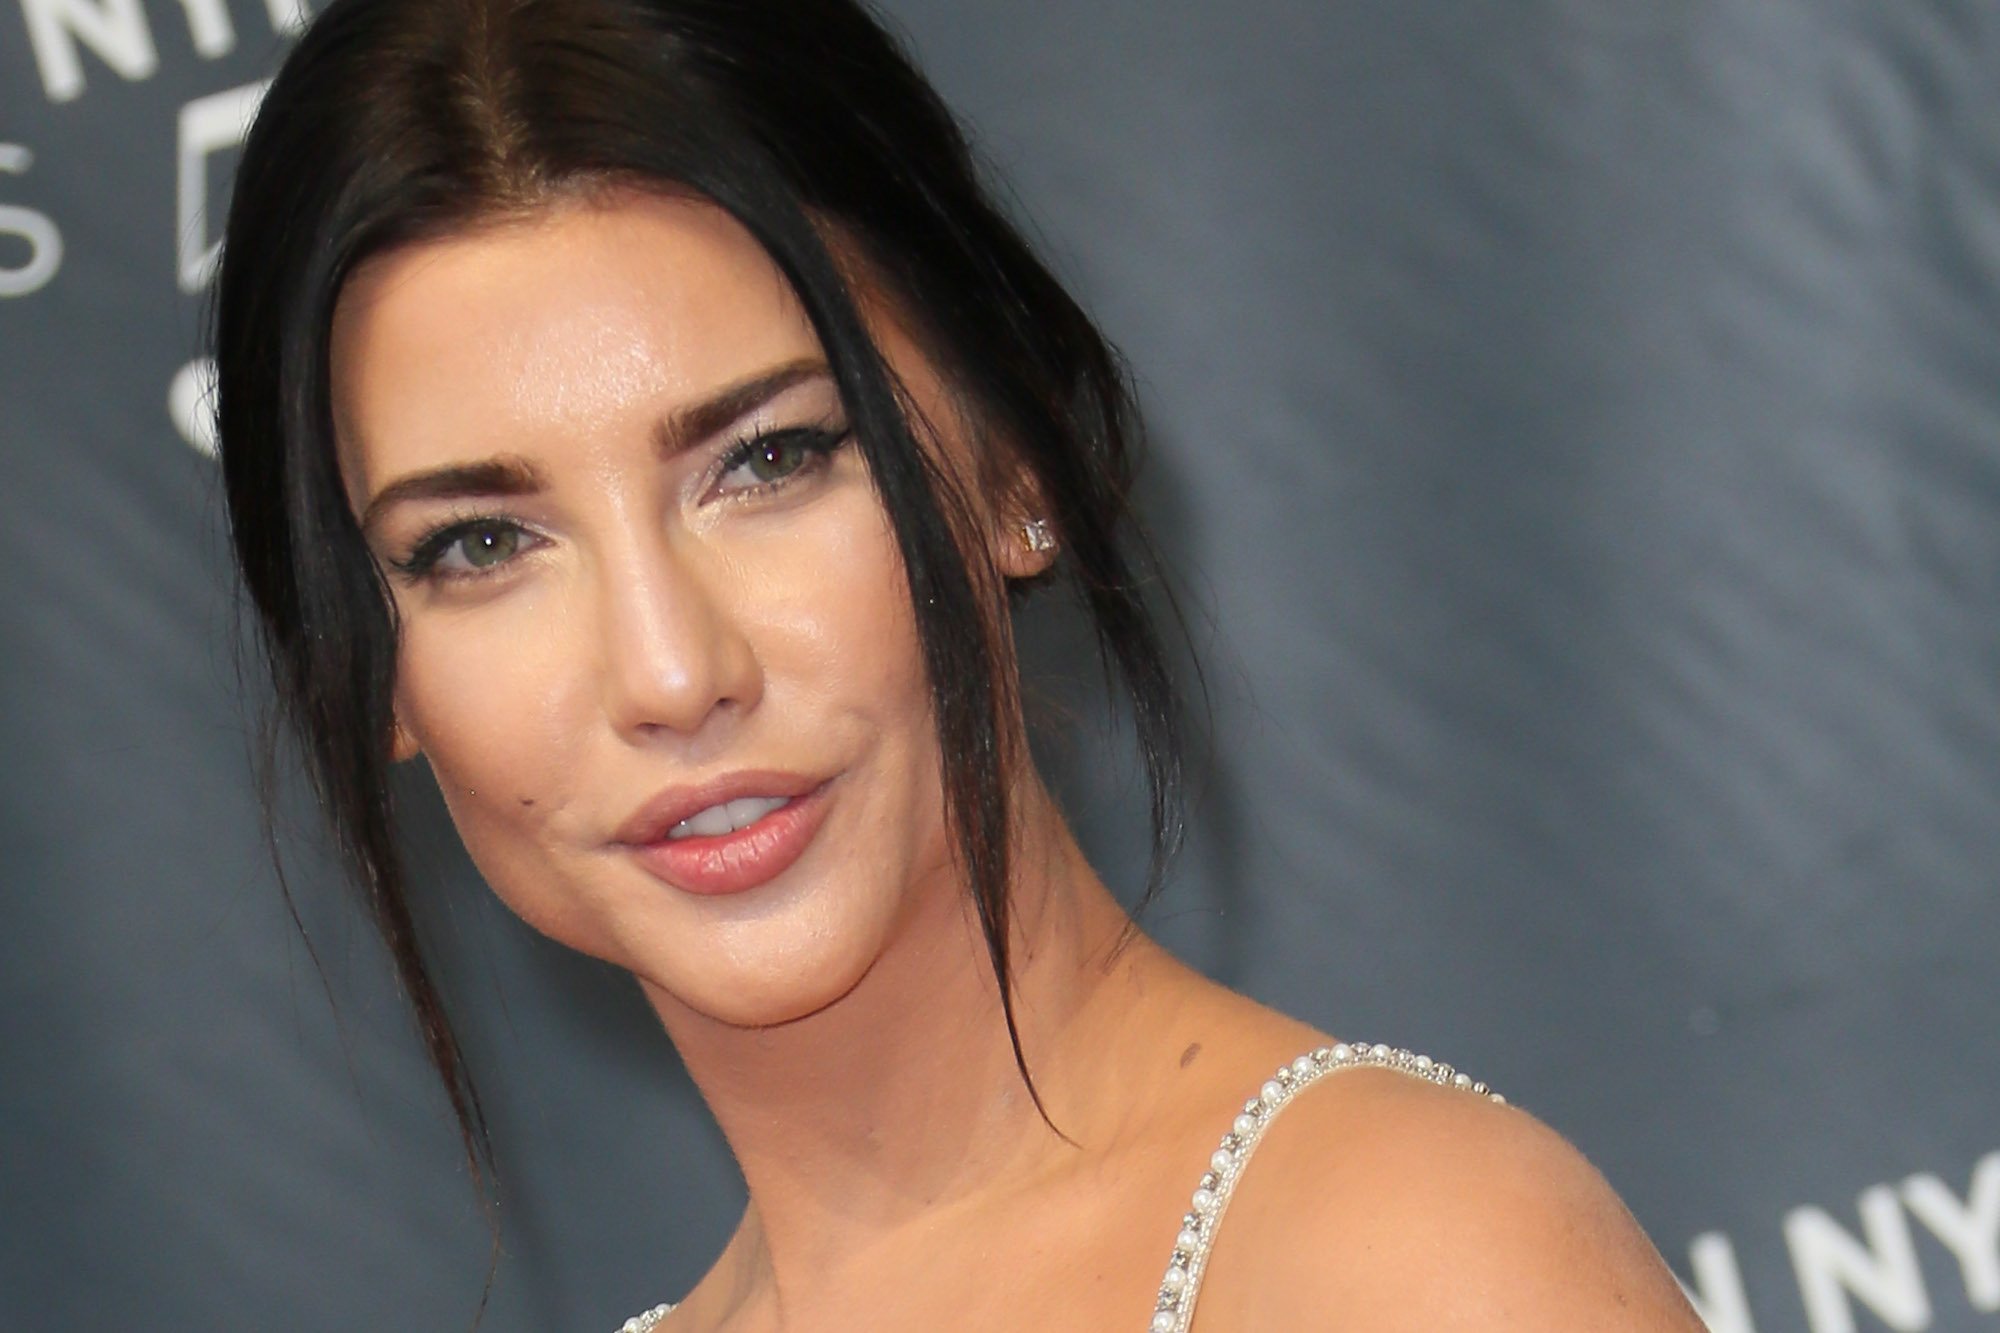 Has ‘The Bold and the Beautiful’ Star Jacqueline MacInnes Wood Had Any Cosmetic Procedures?